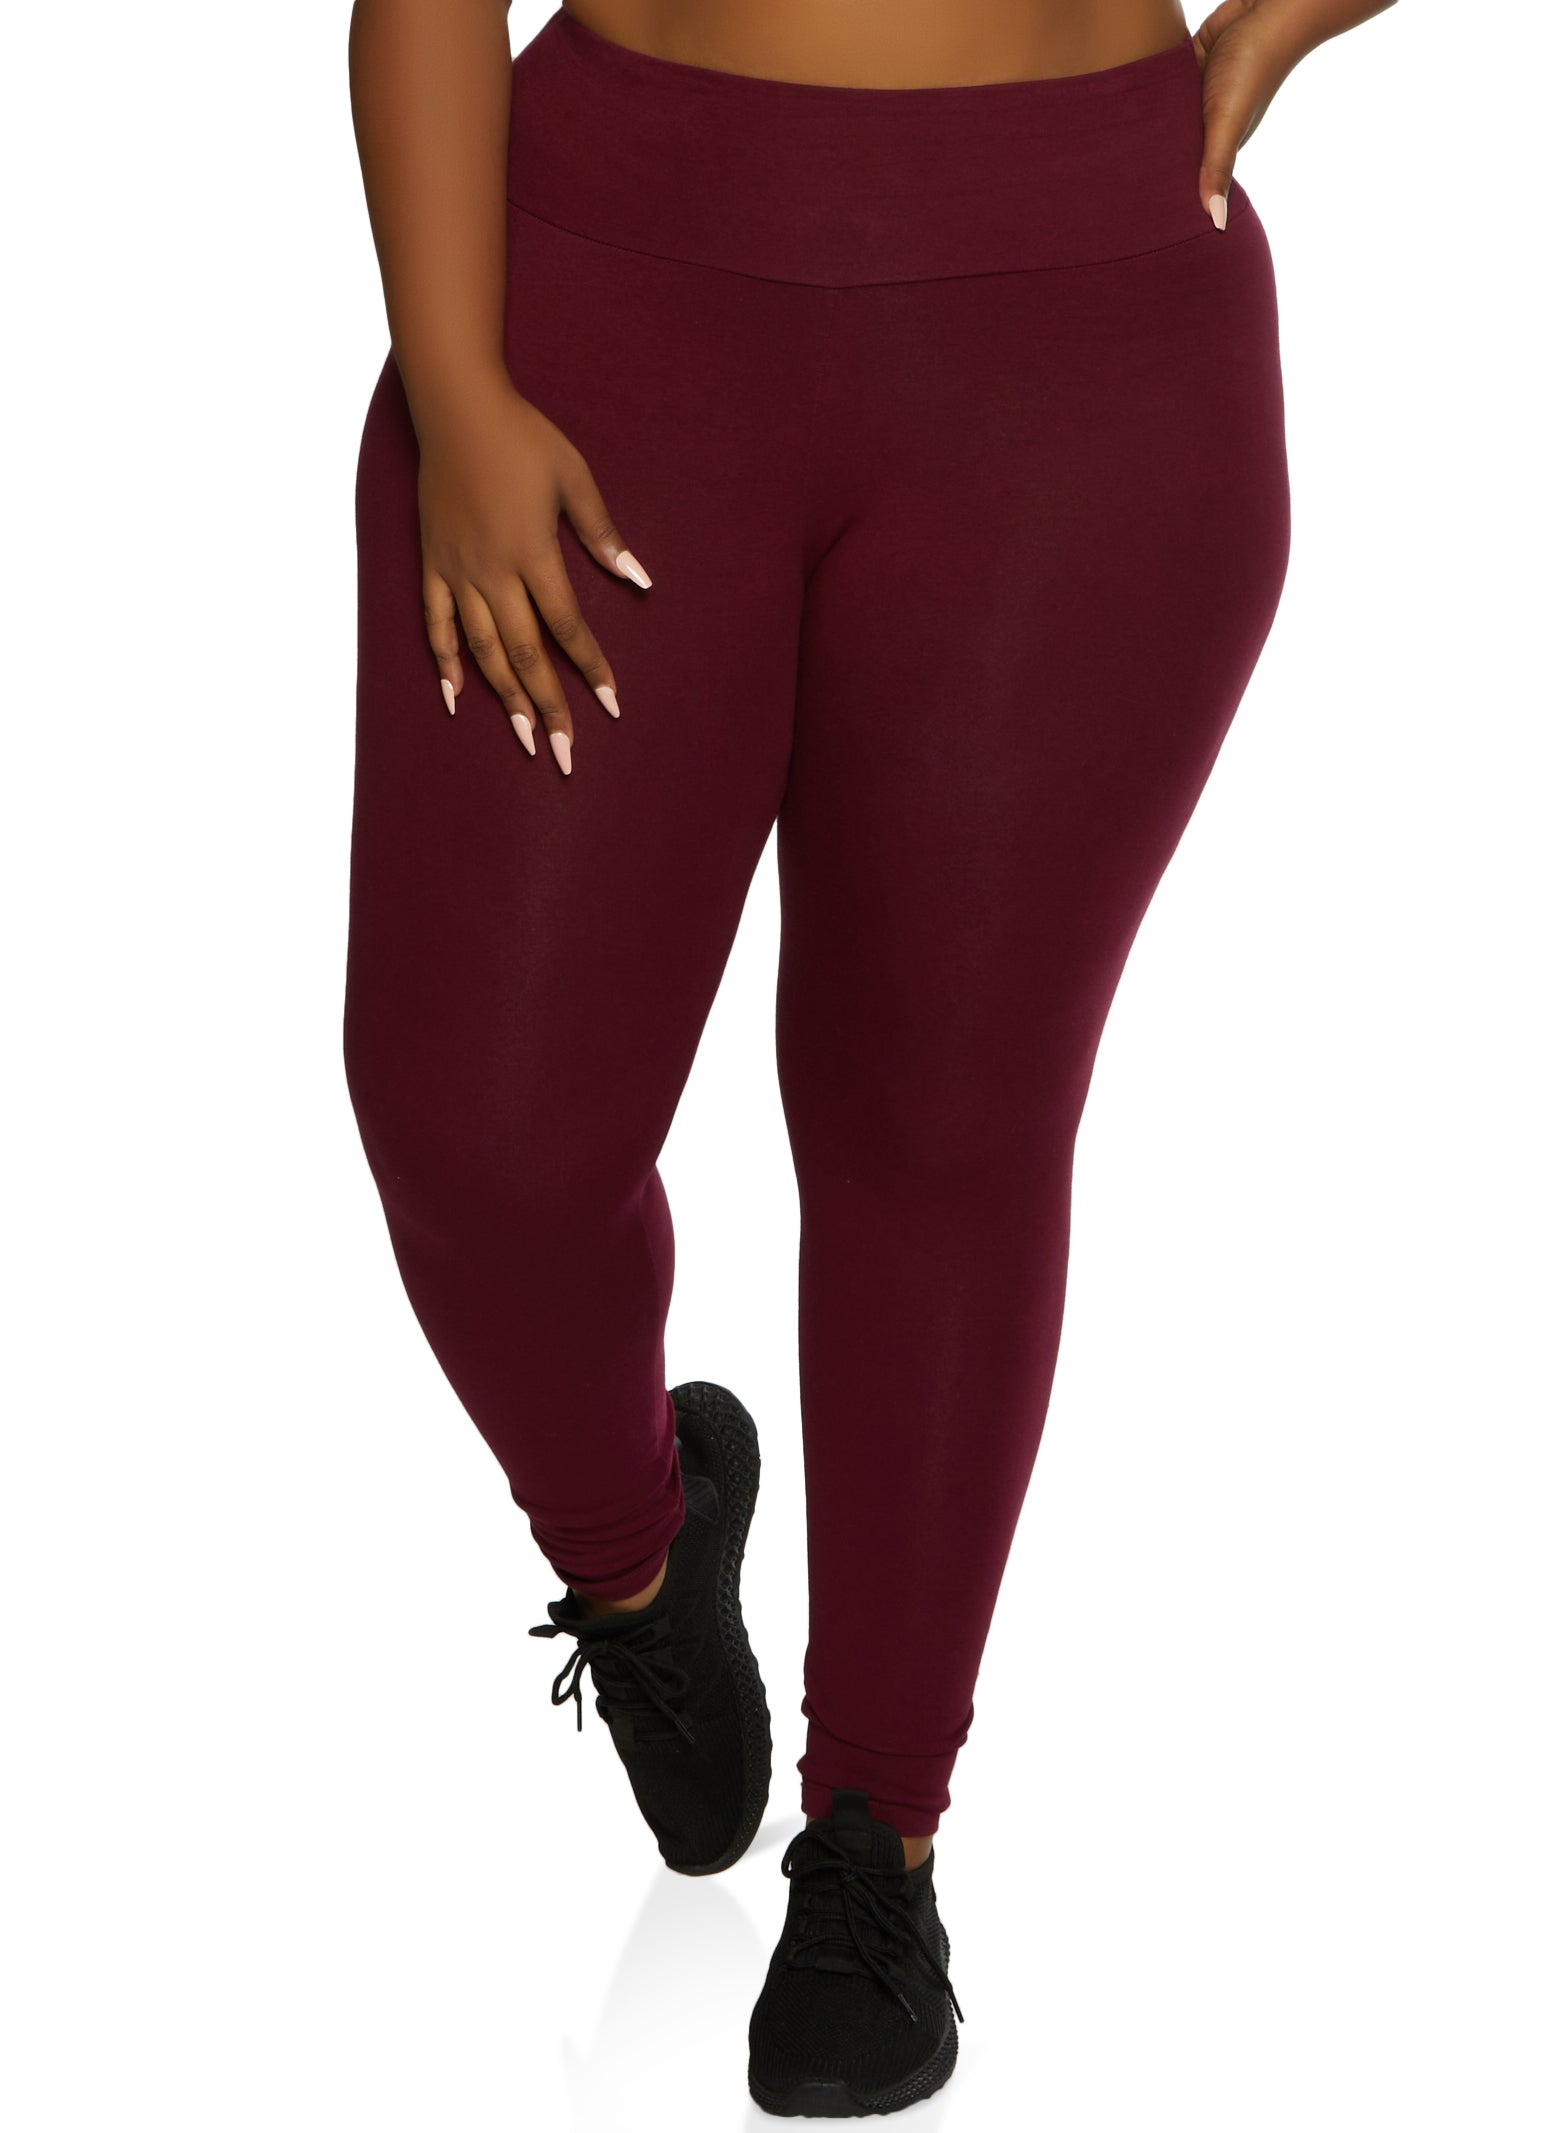 PLUS SIZE Burgundy Gingerbread Holiday Leggings Fits Sizes 12-18 NWT